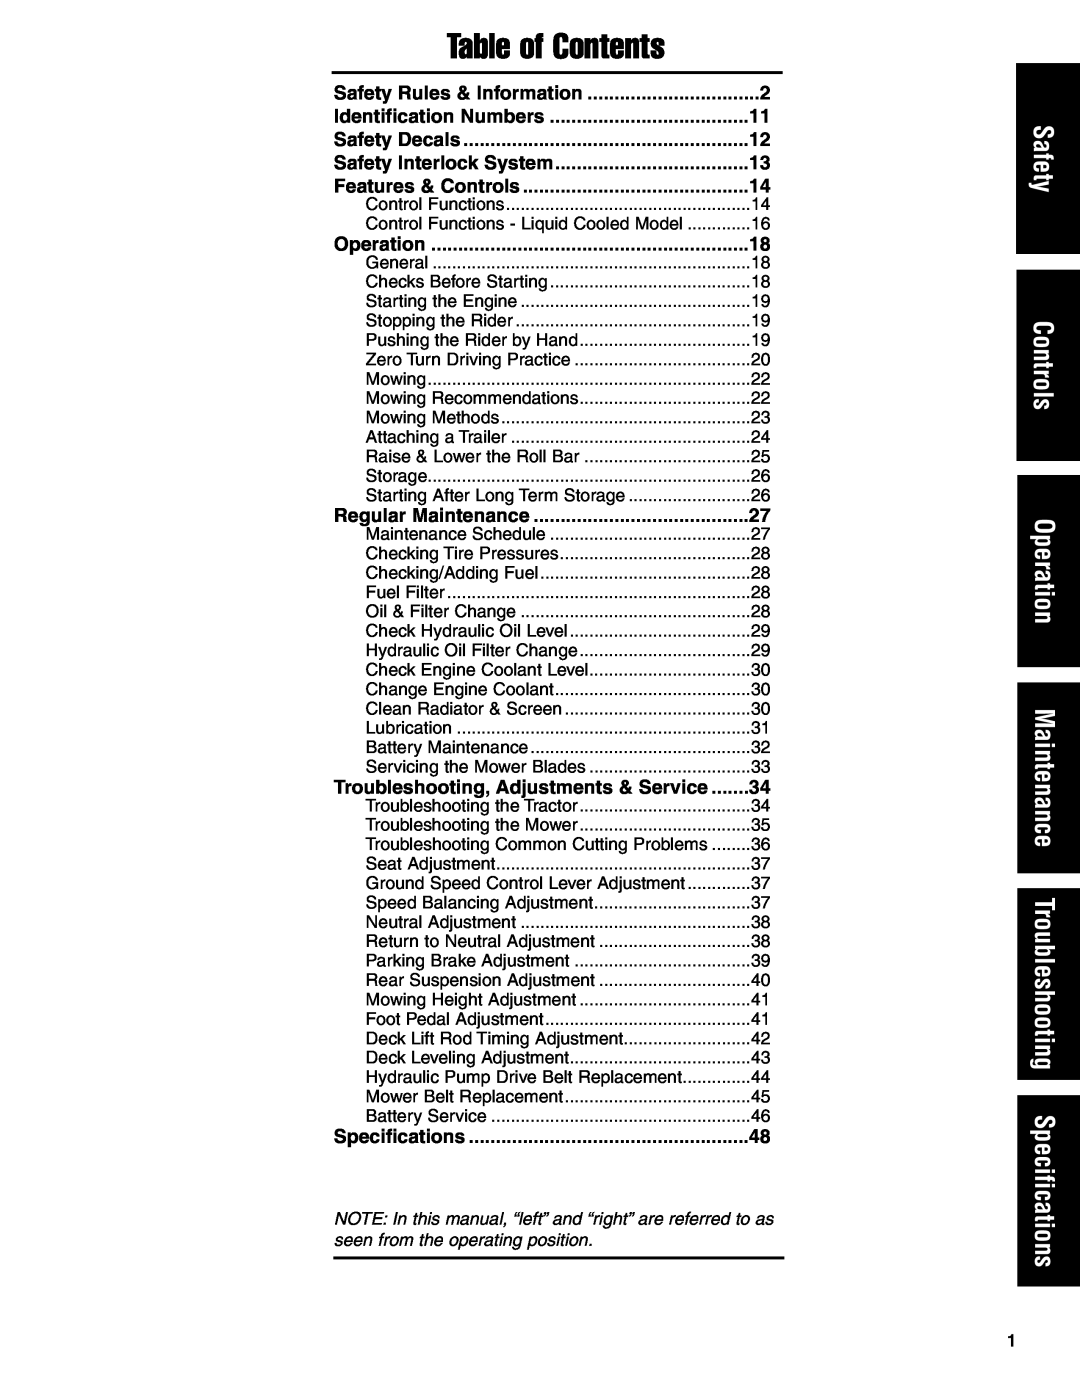 Ferris Industries 5900624, 5901170 Safety Controls Operation Maintenance Troubleshooting Specifications, Table of Contents 